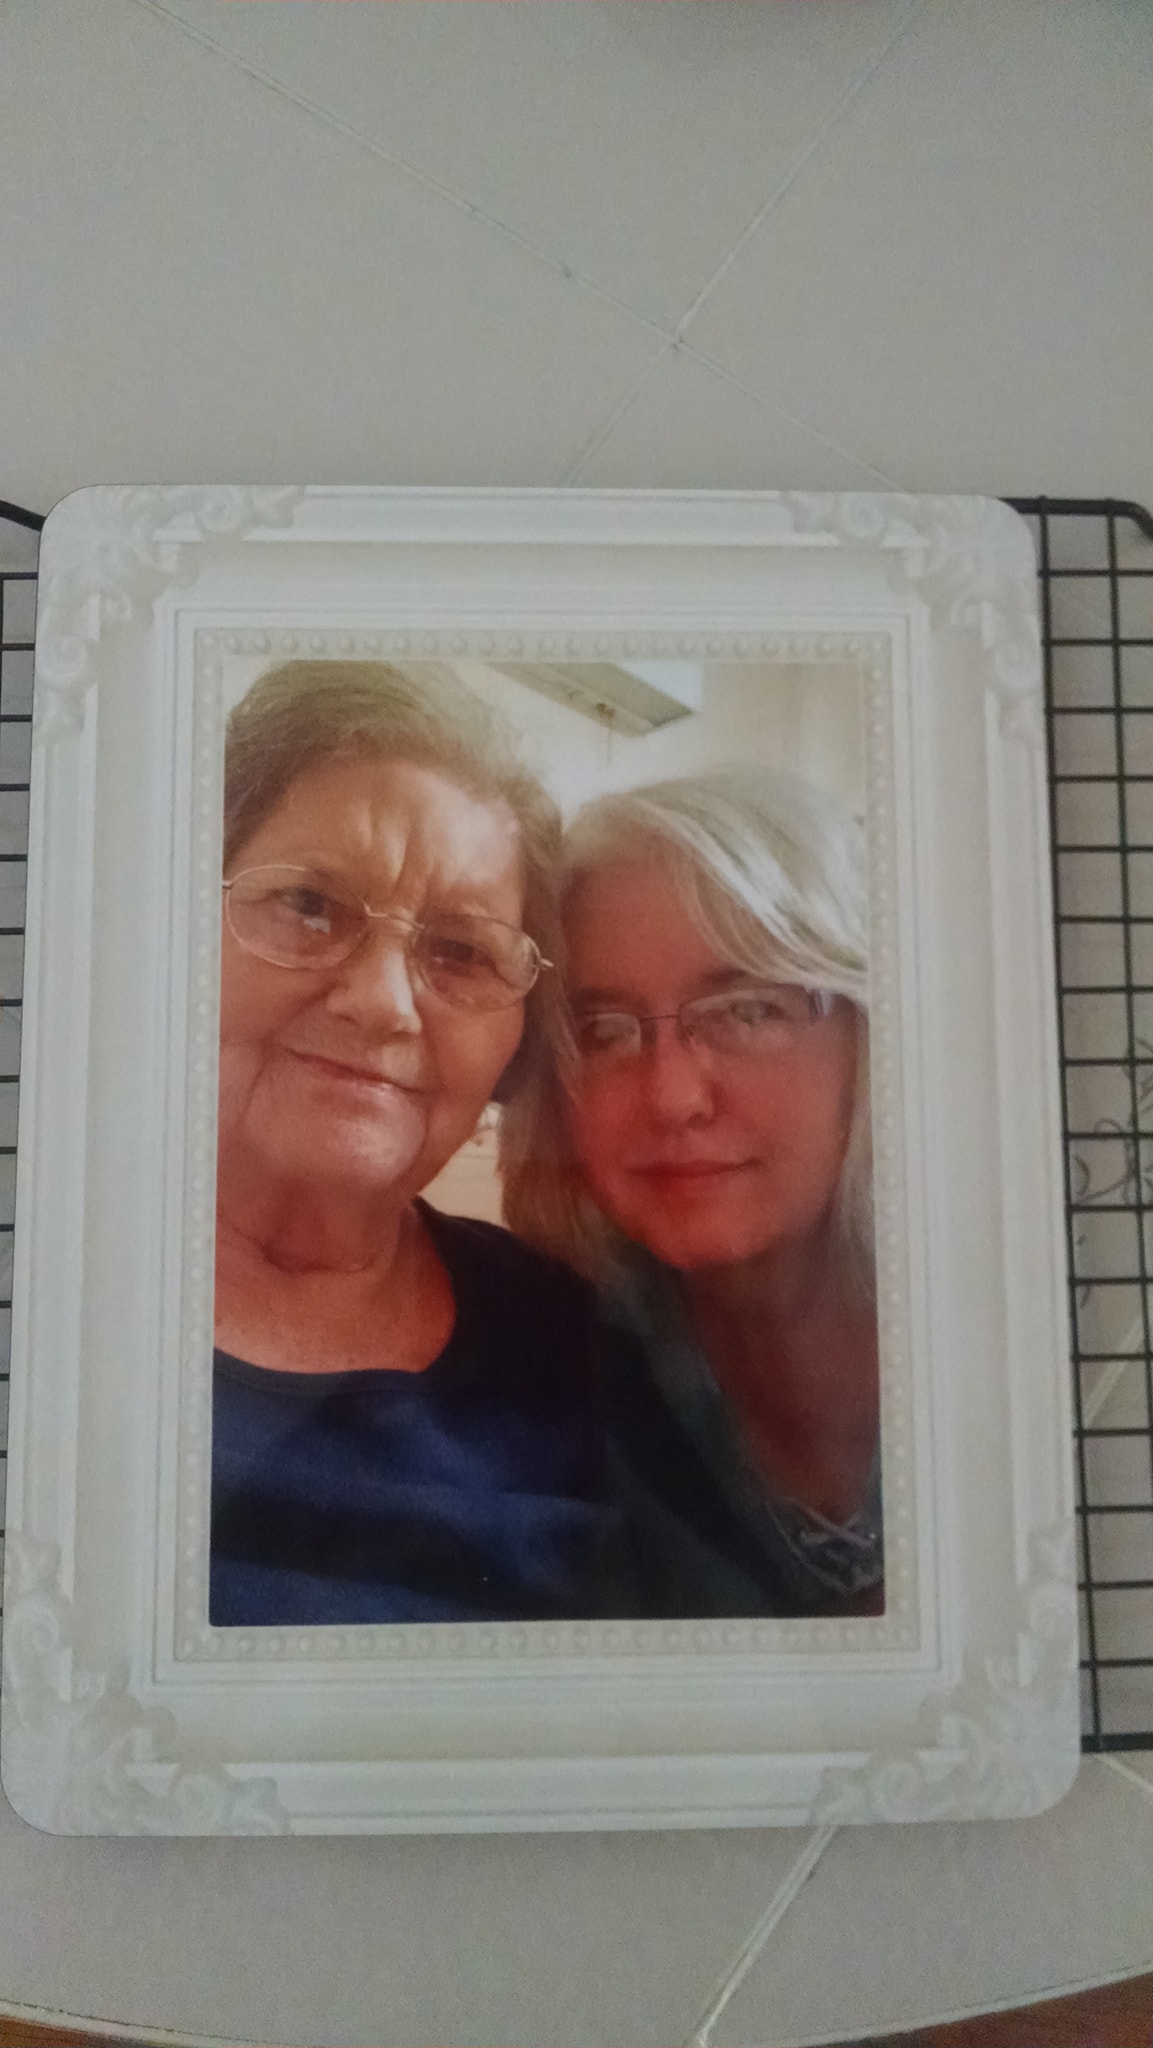 After my mom passed I used one of my photos of her and I and made this for myself.